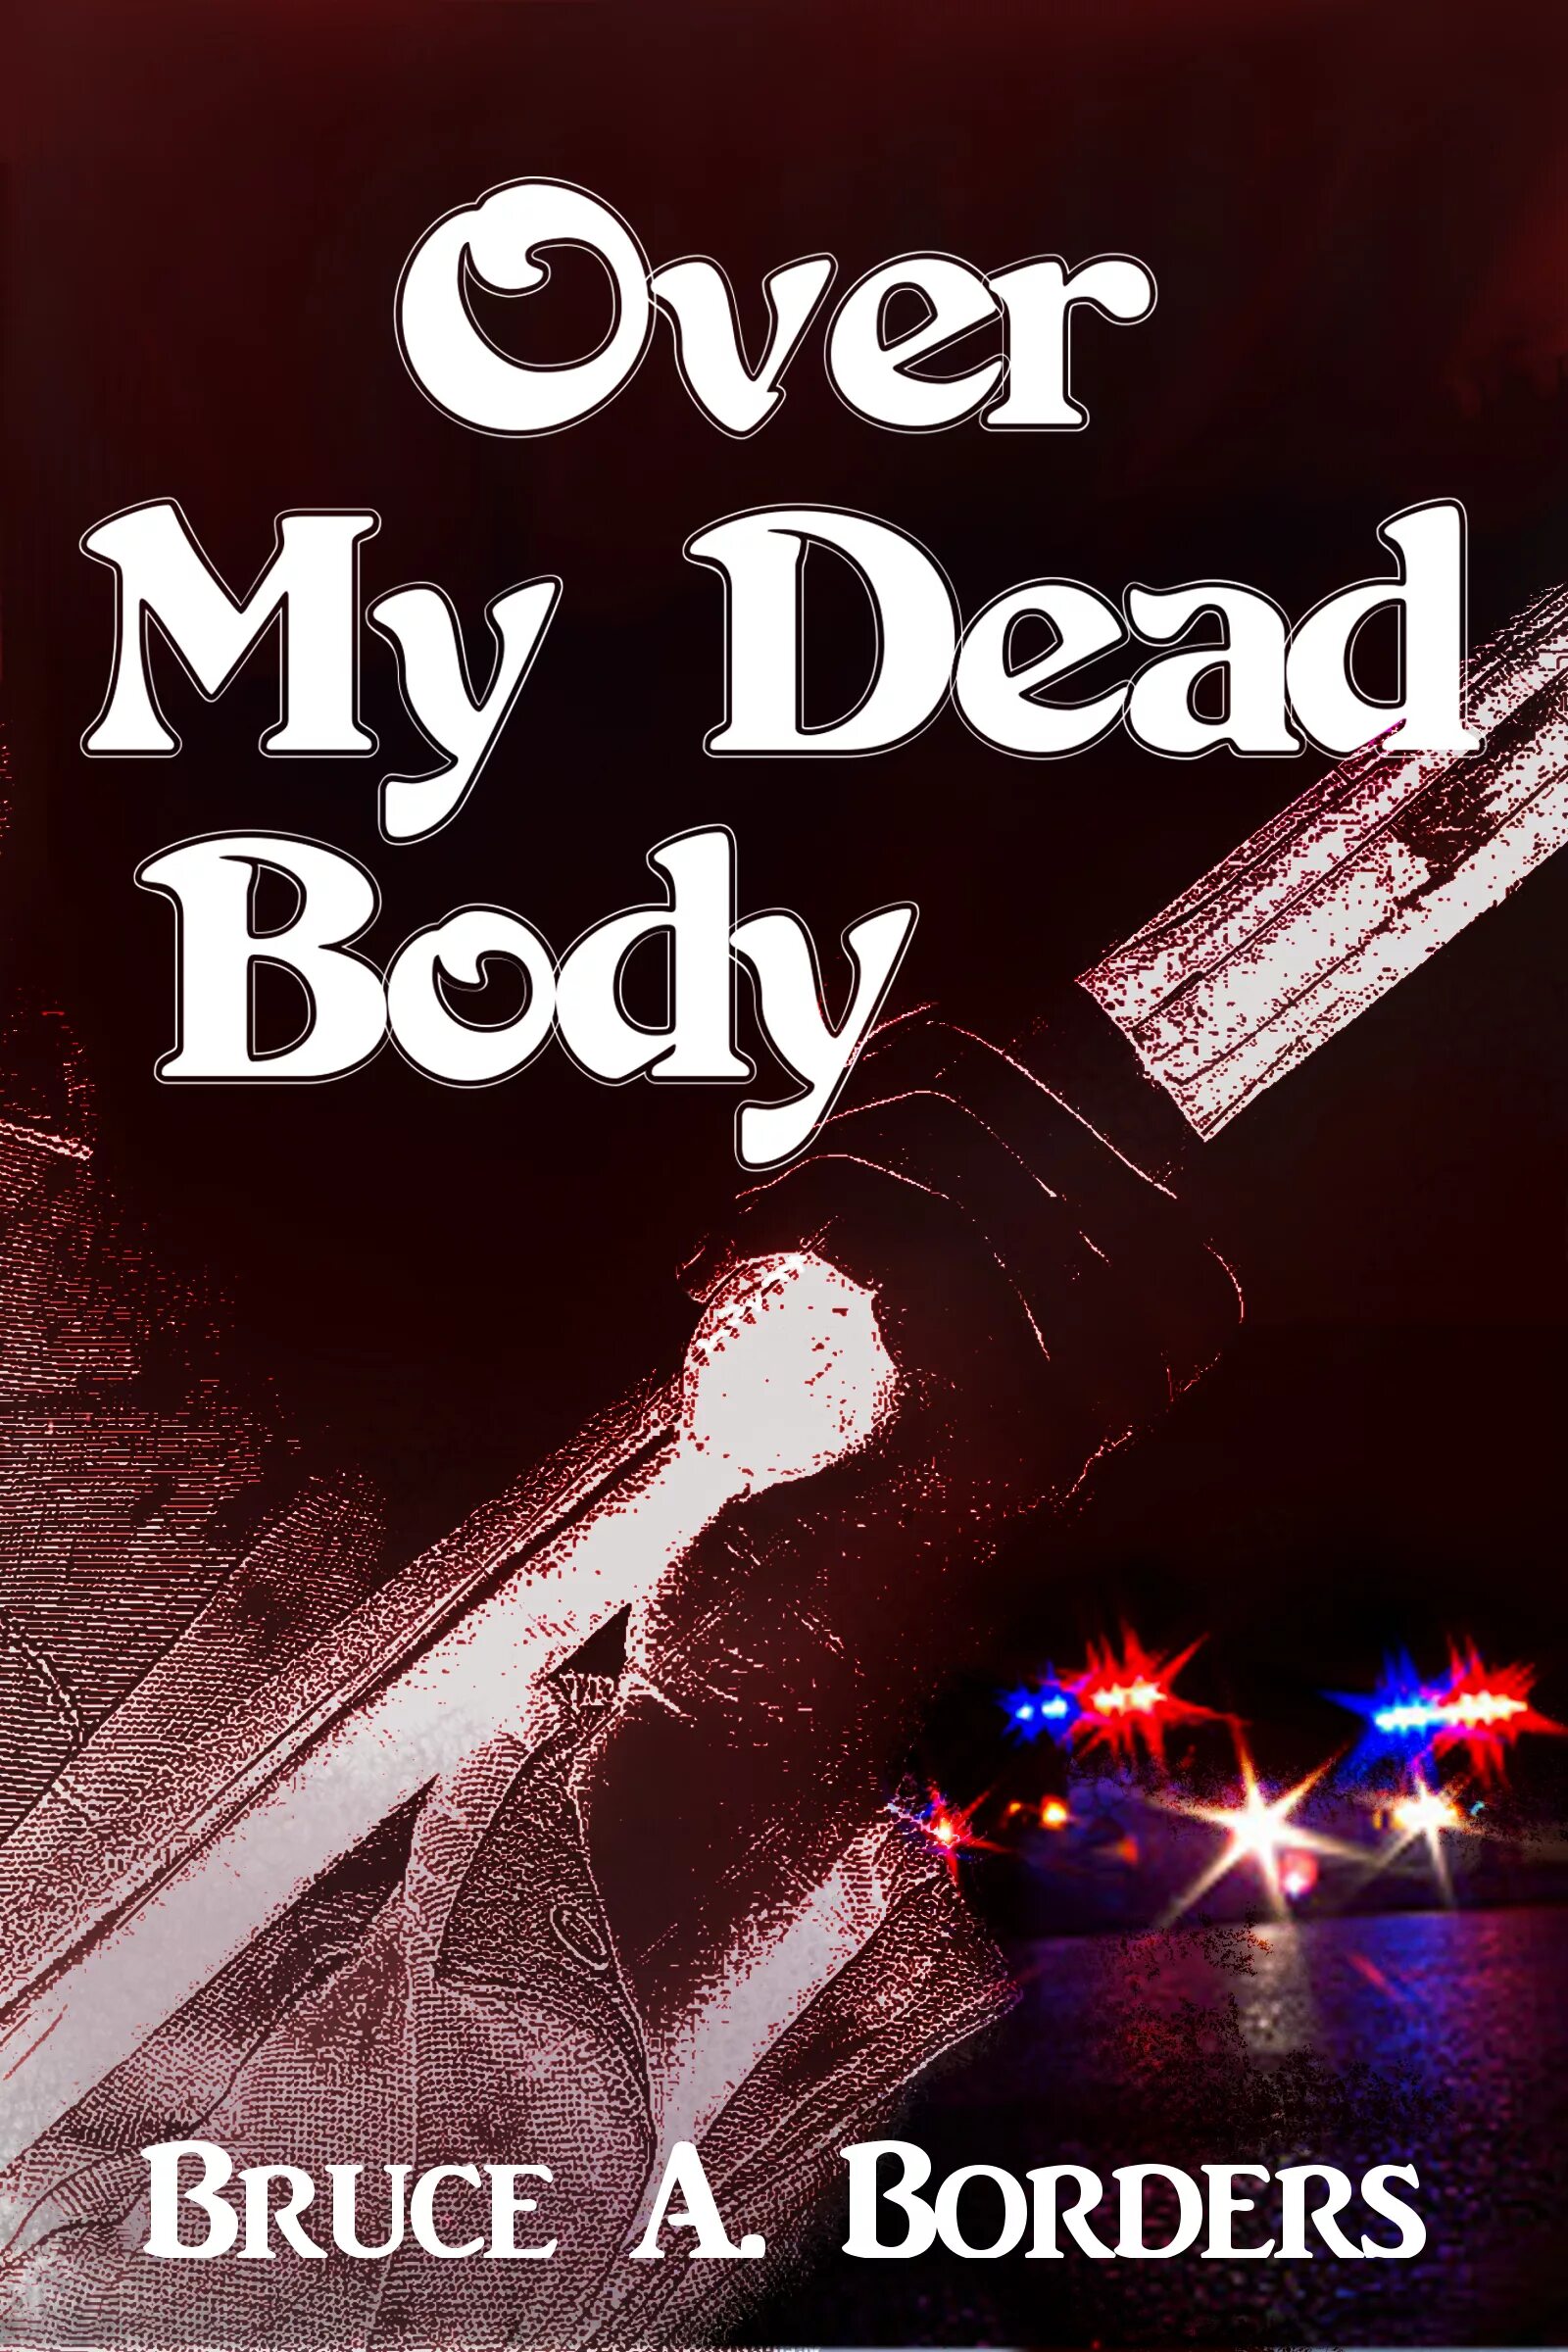 Death over. Over my Dead body. Dead my. Tony Mills - 2015 - over my Dead body.